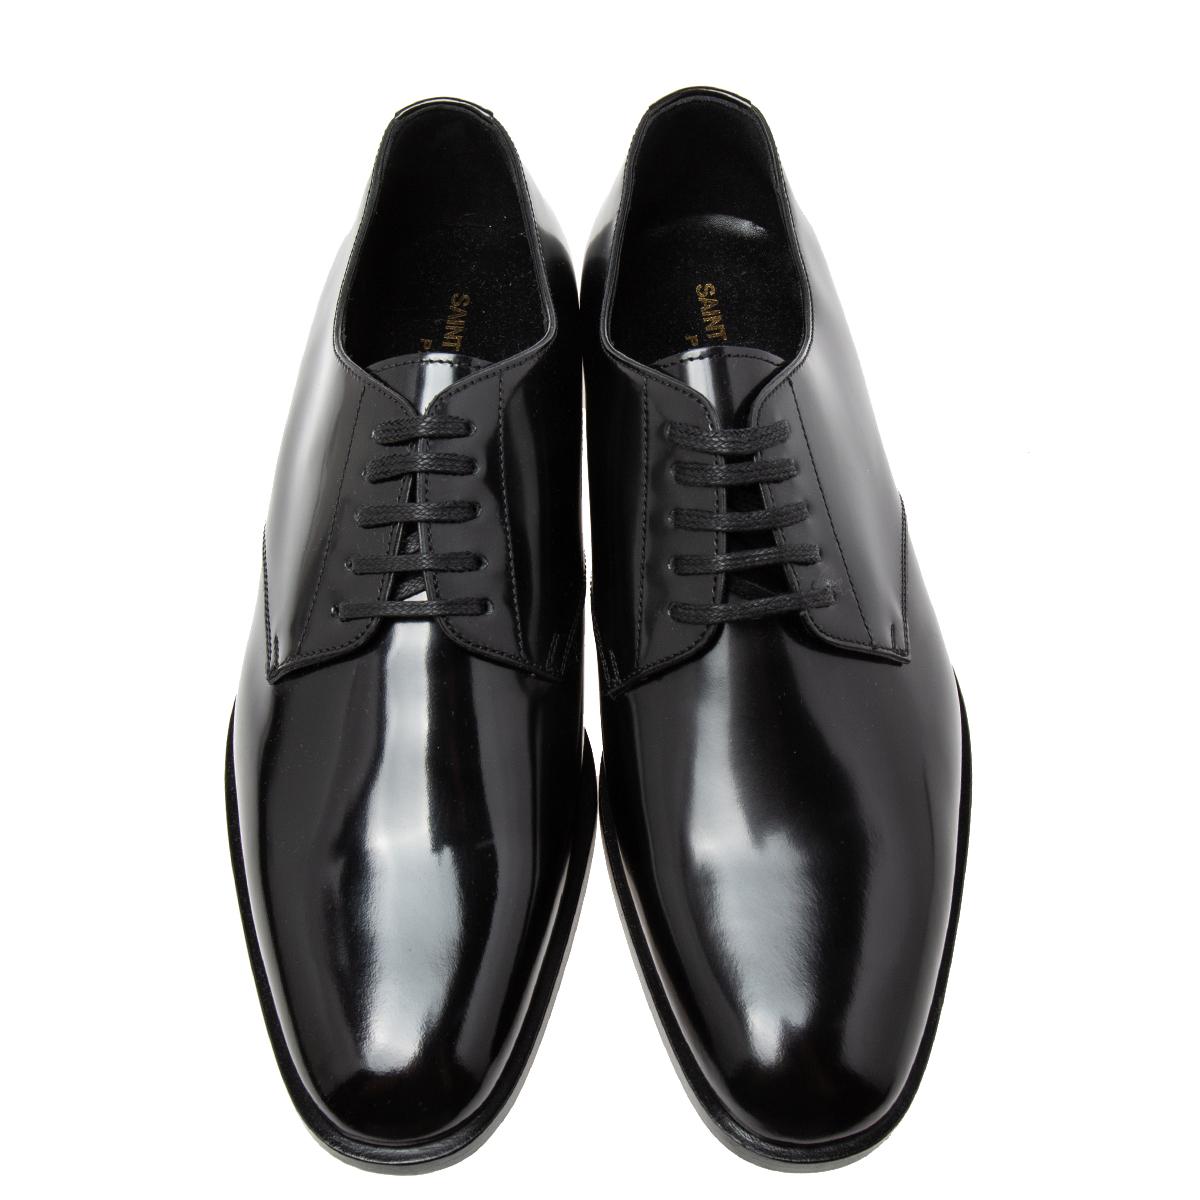 The Montaigne derby by Saint Laurent explores new elements of luxury and class. The upper is composed of black patent leather with matching laces that complete the design. Use these derby shoes to enhance your suits or simple 'tee & trousers'